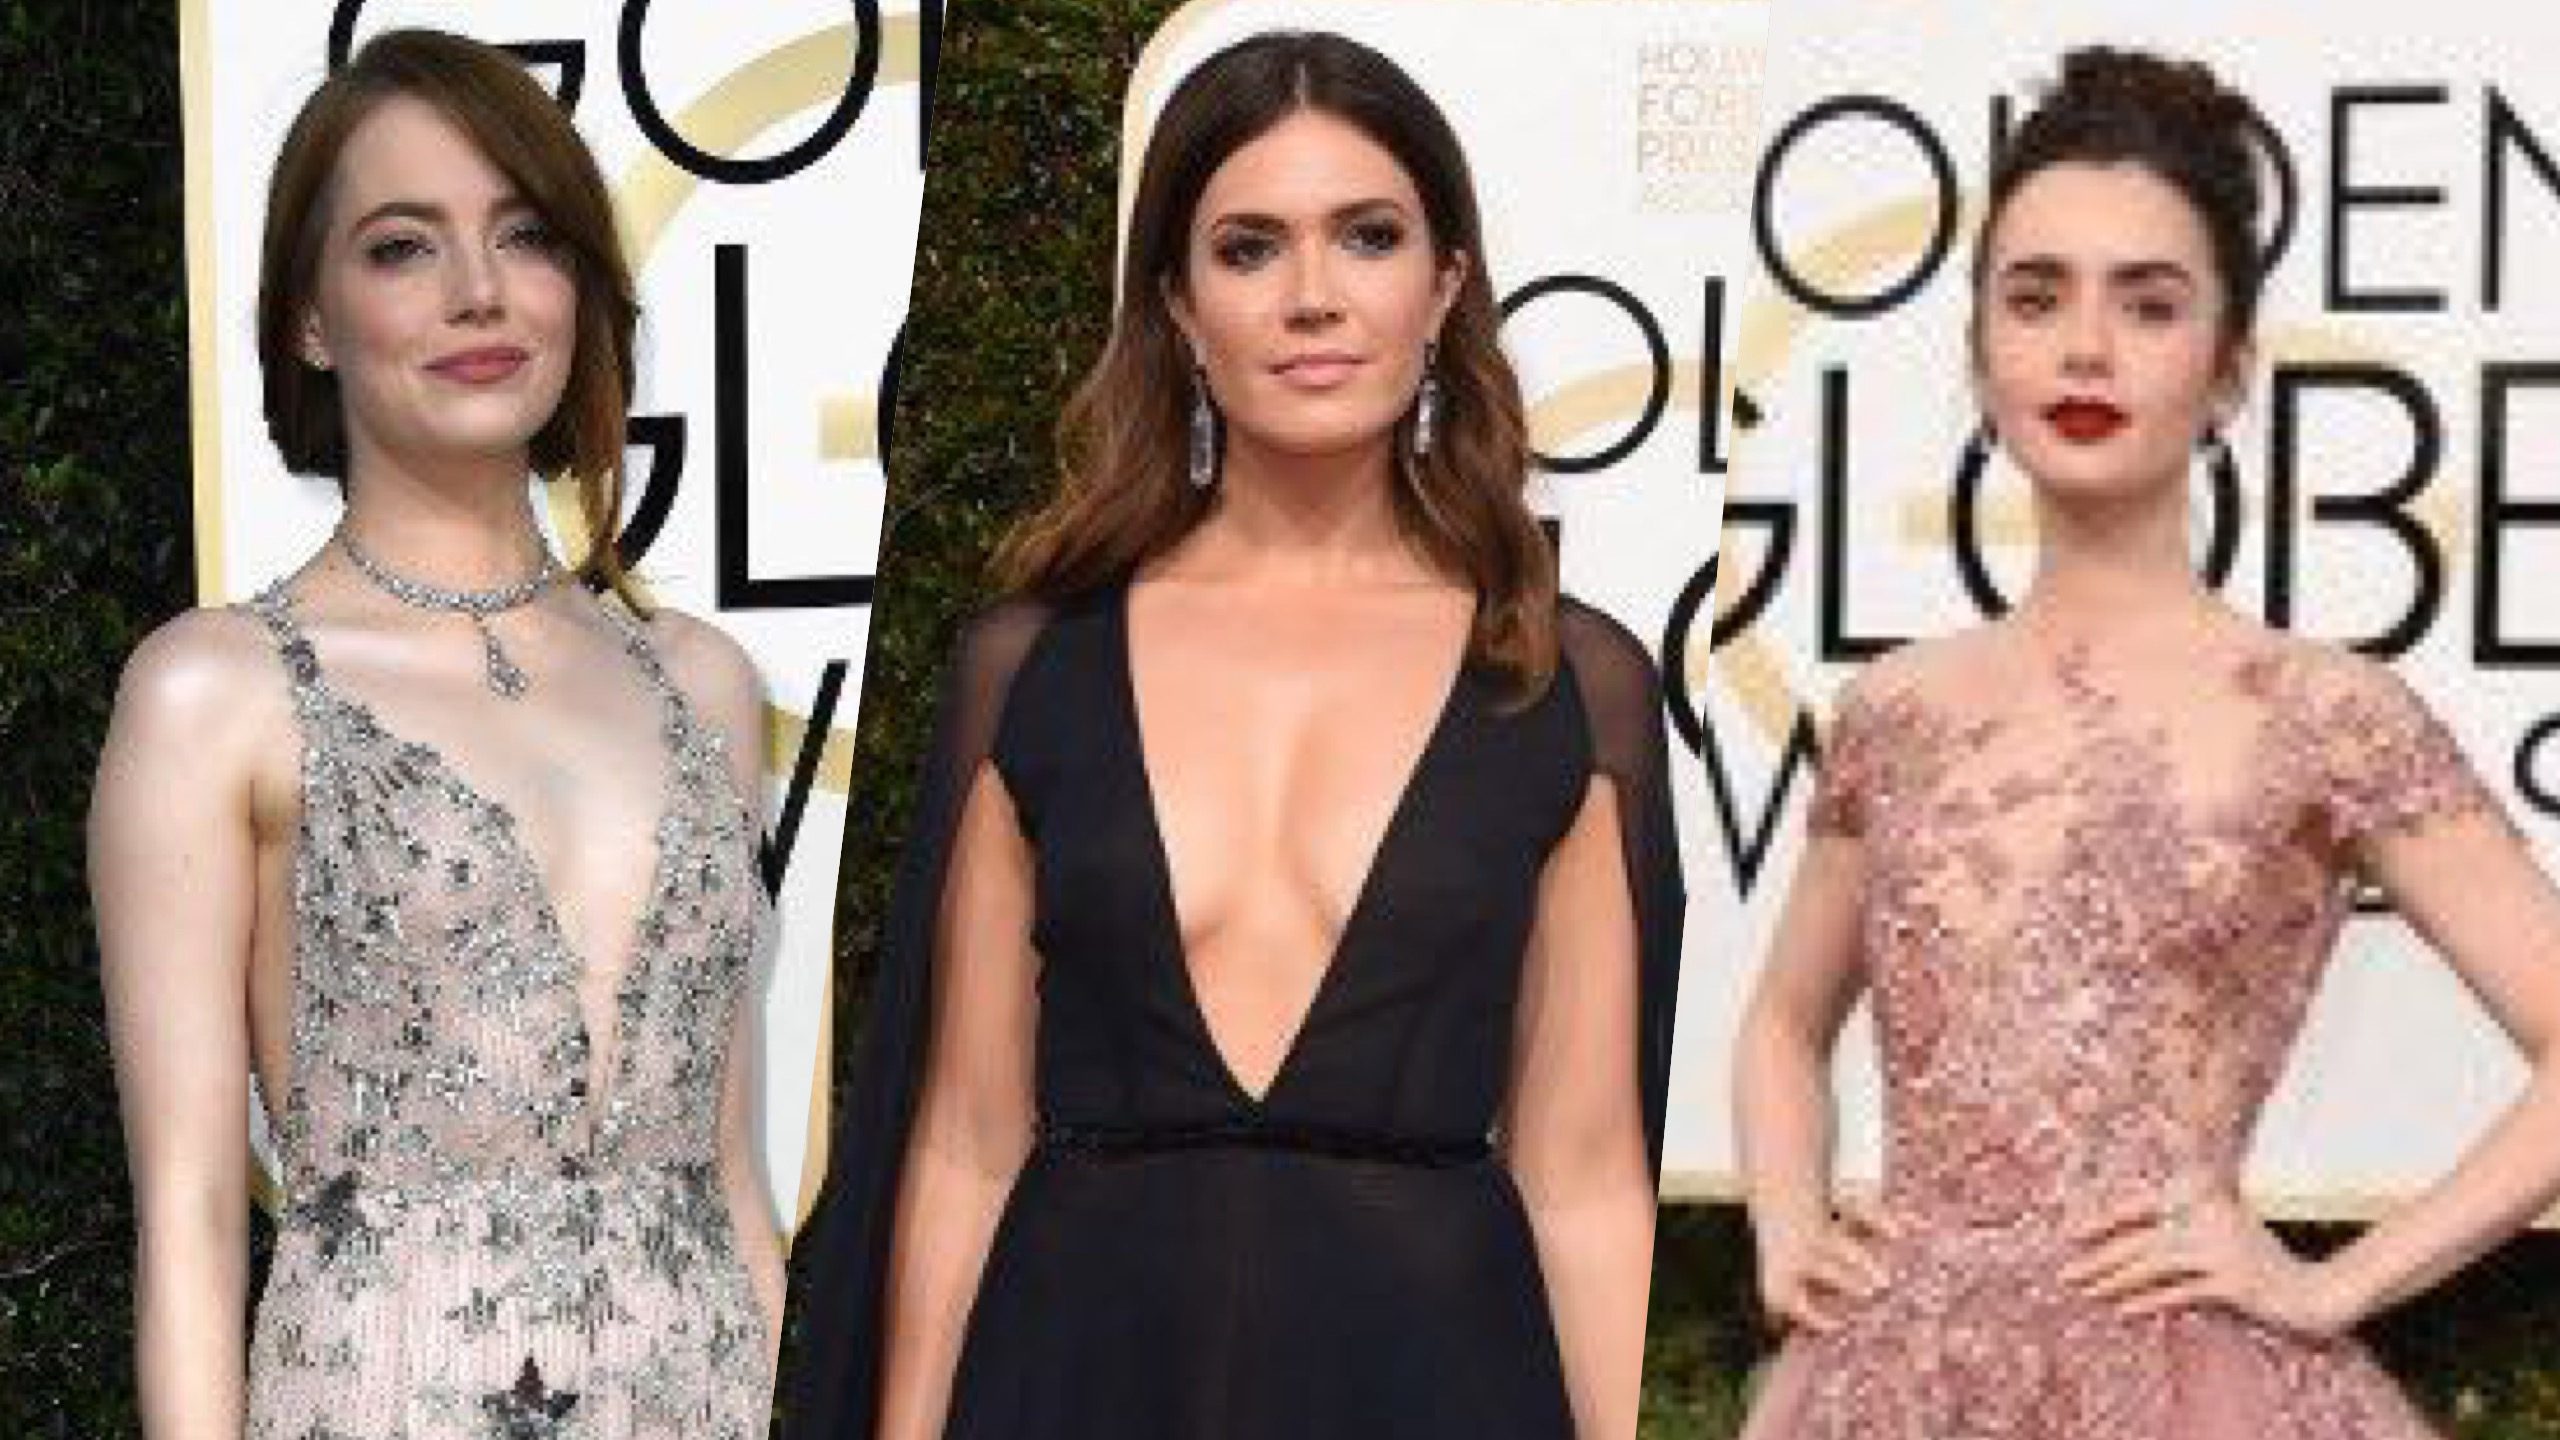 IN PHOTOS: 12 Best dressed at Golden Globes 2017